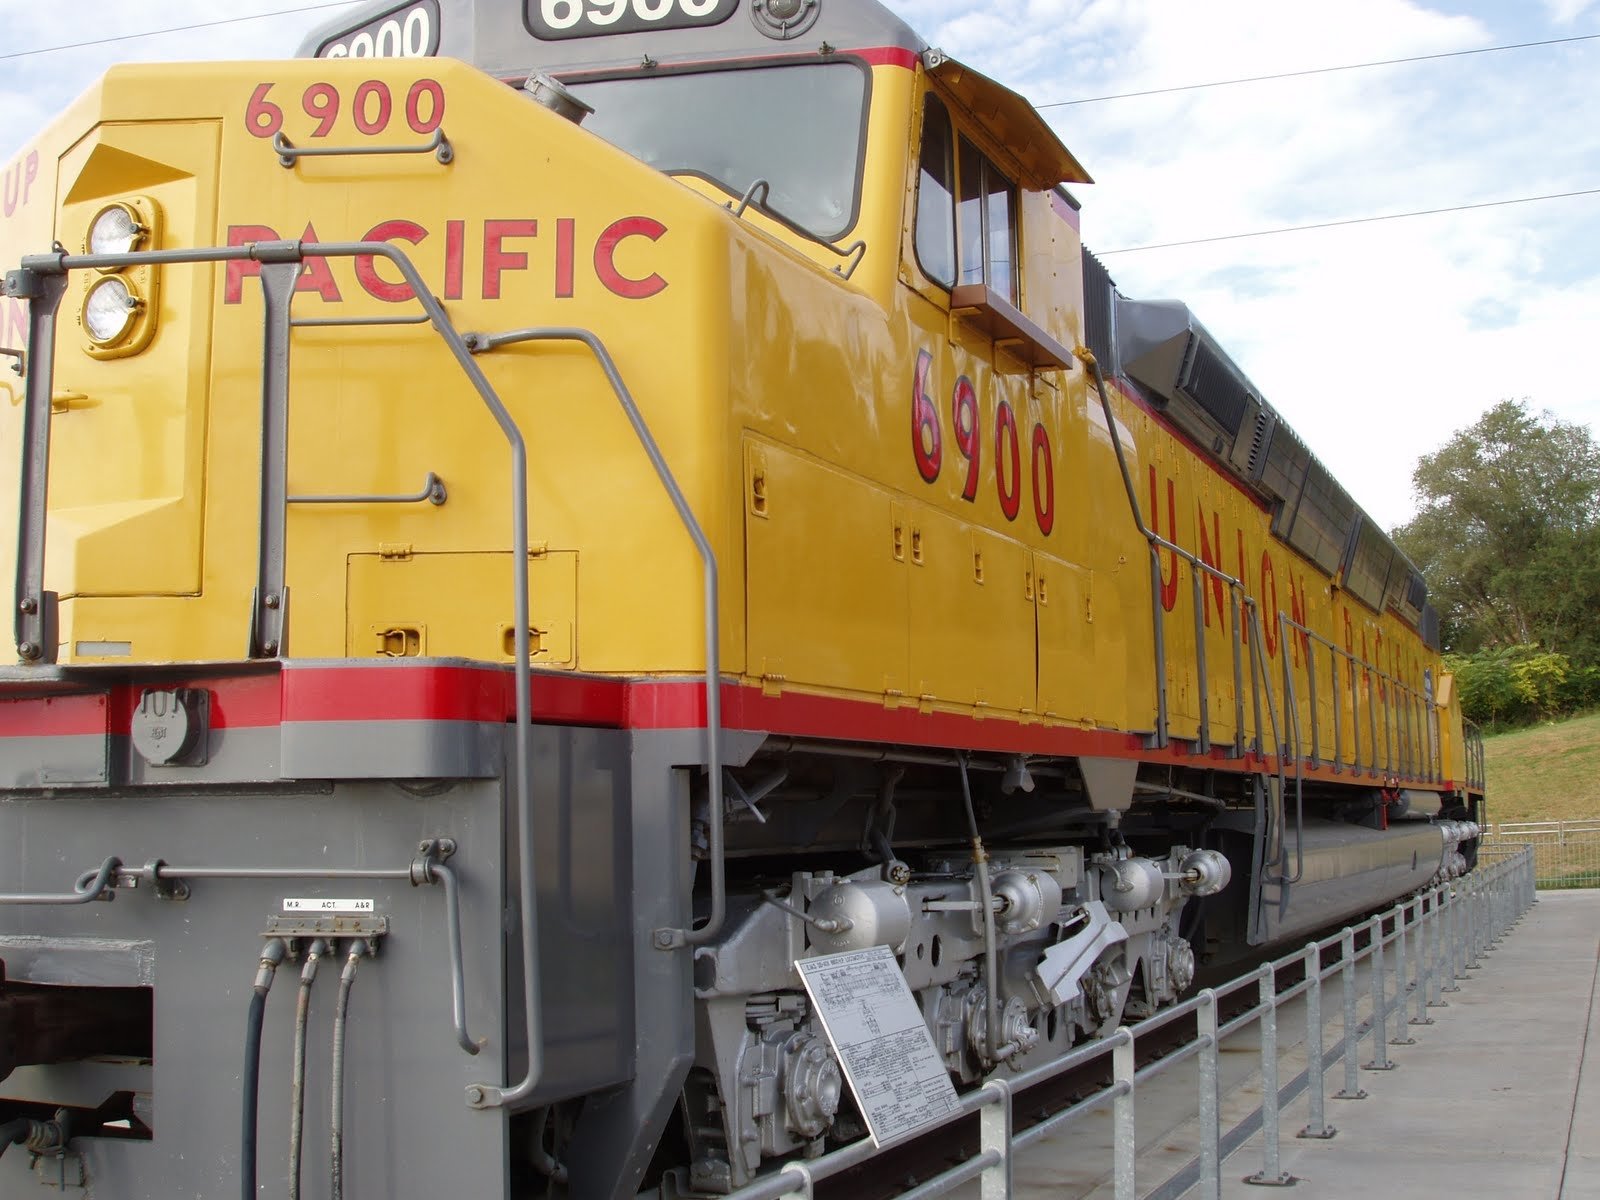 Union Pacific HD Wallpaper and Background Image